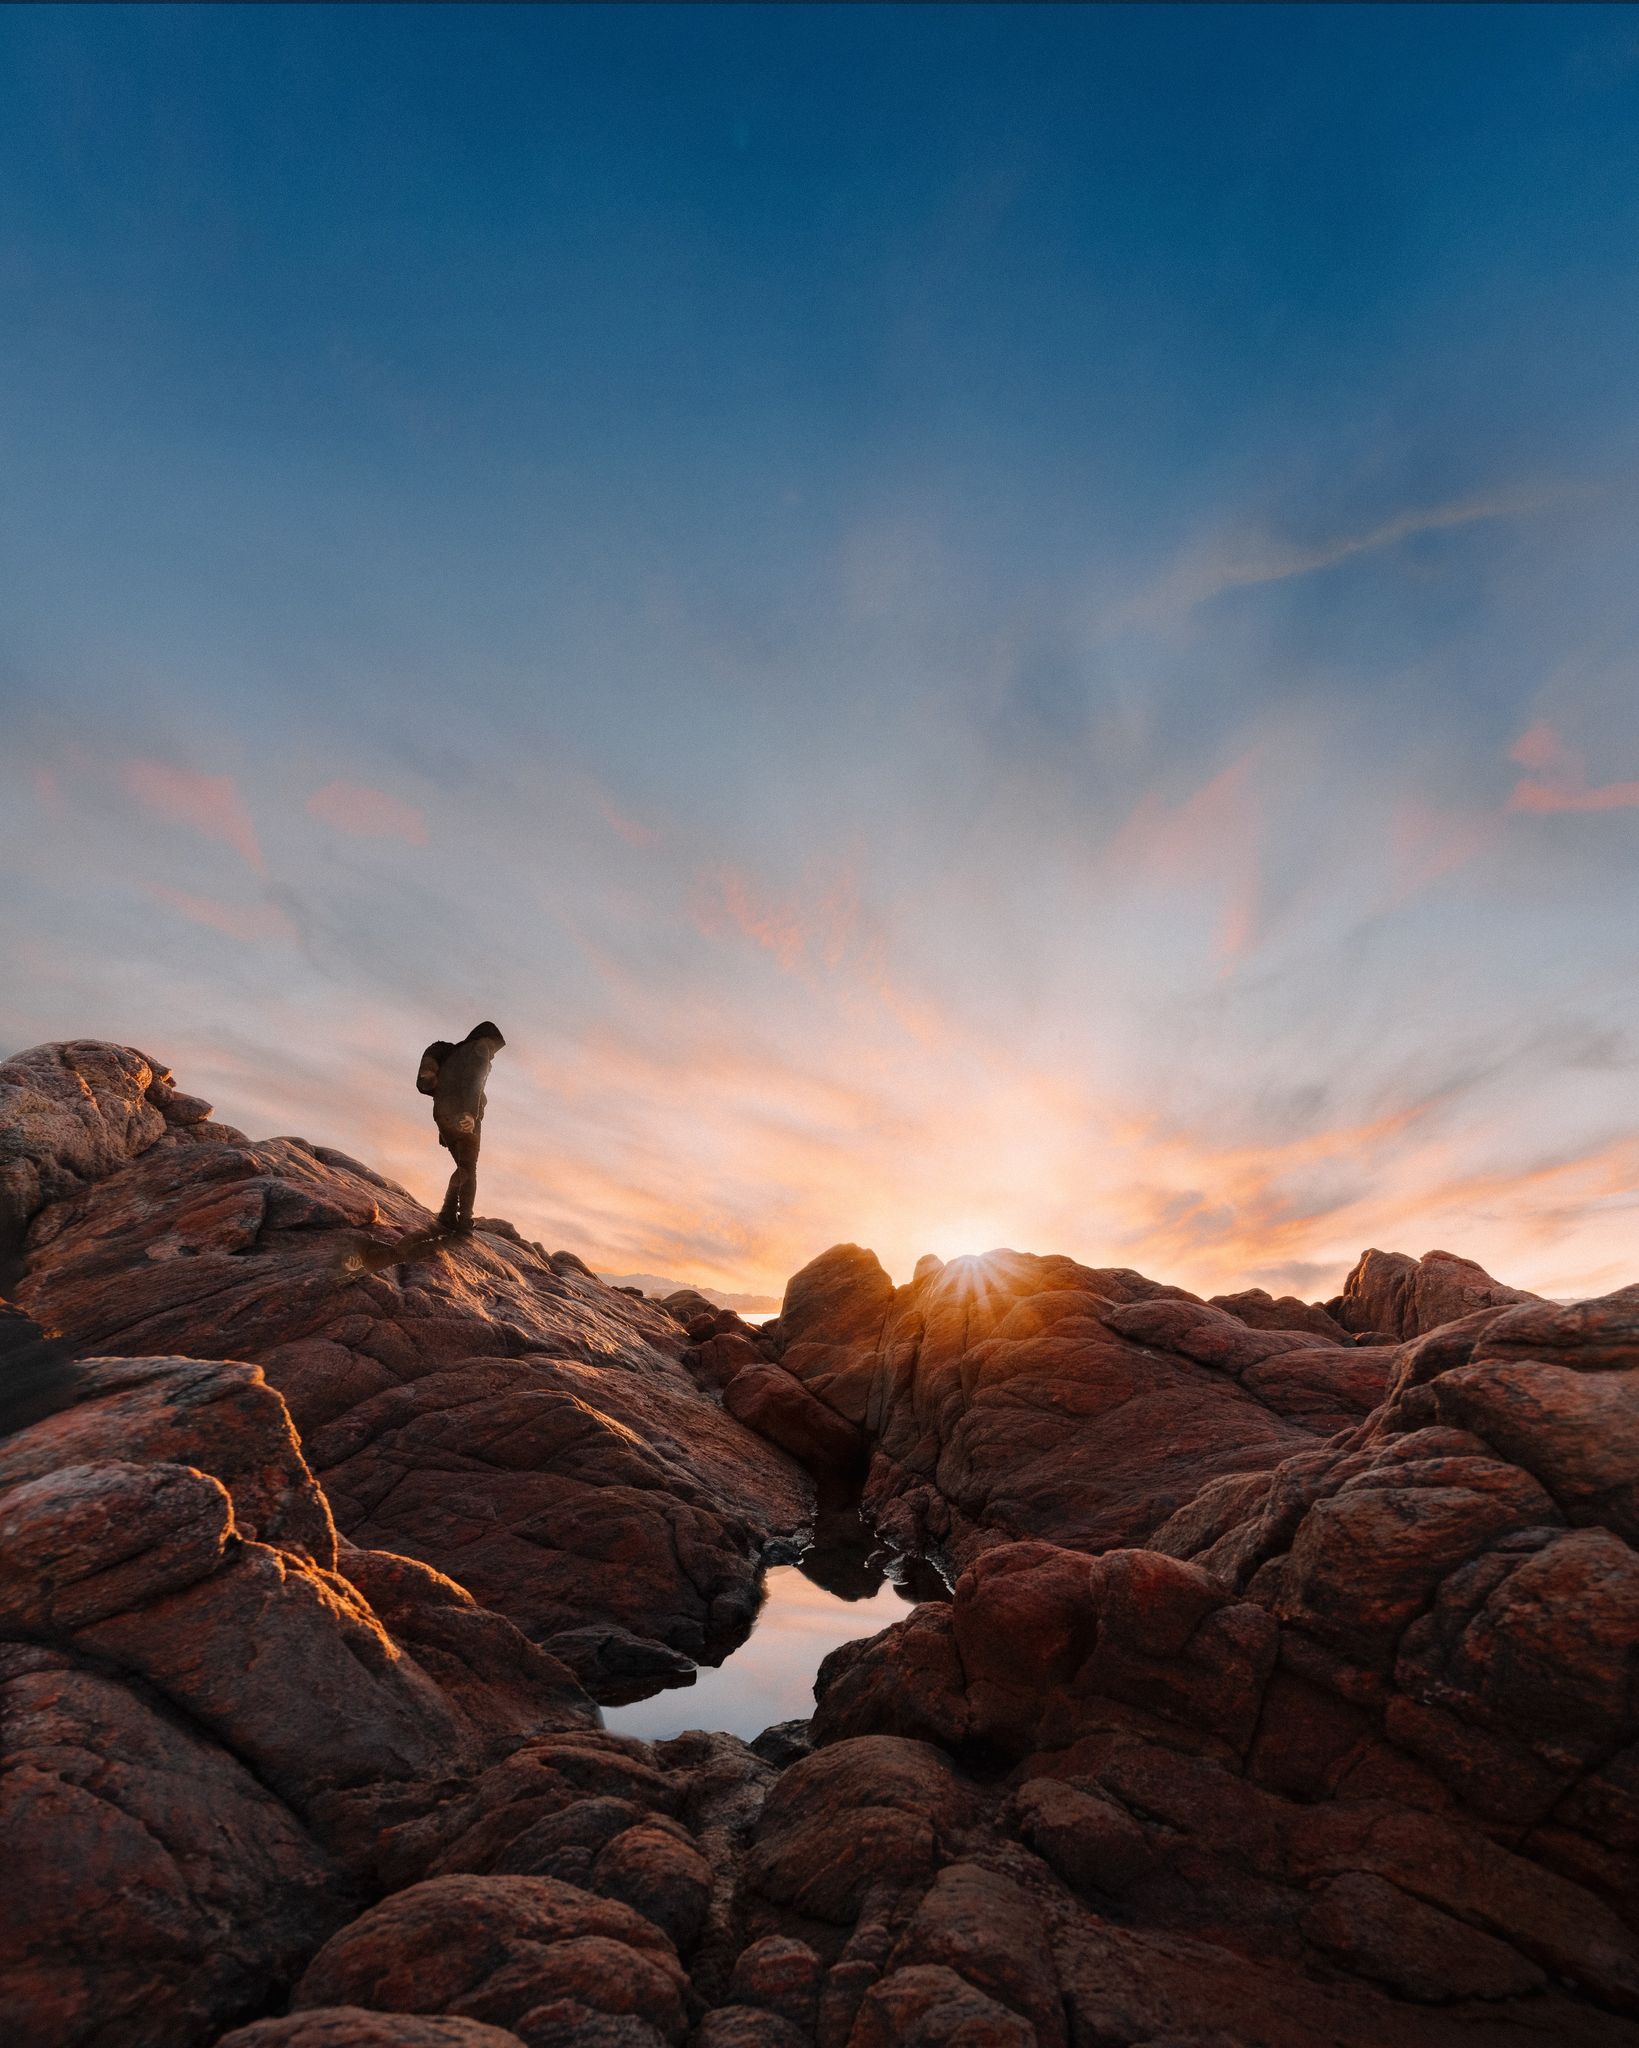 A person walking along a rocky trail at sunset.